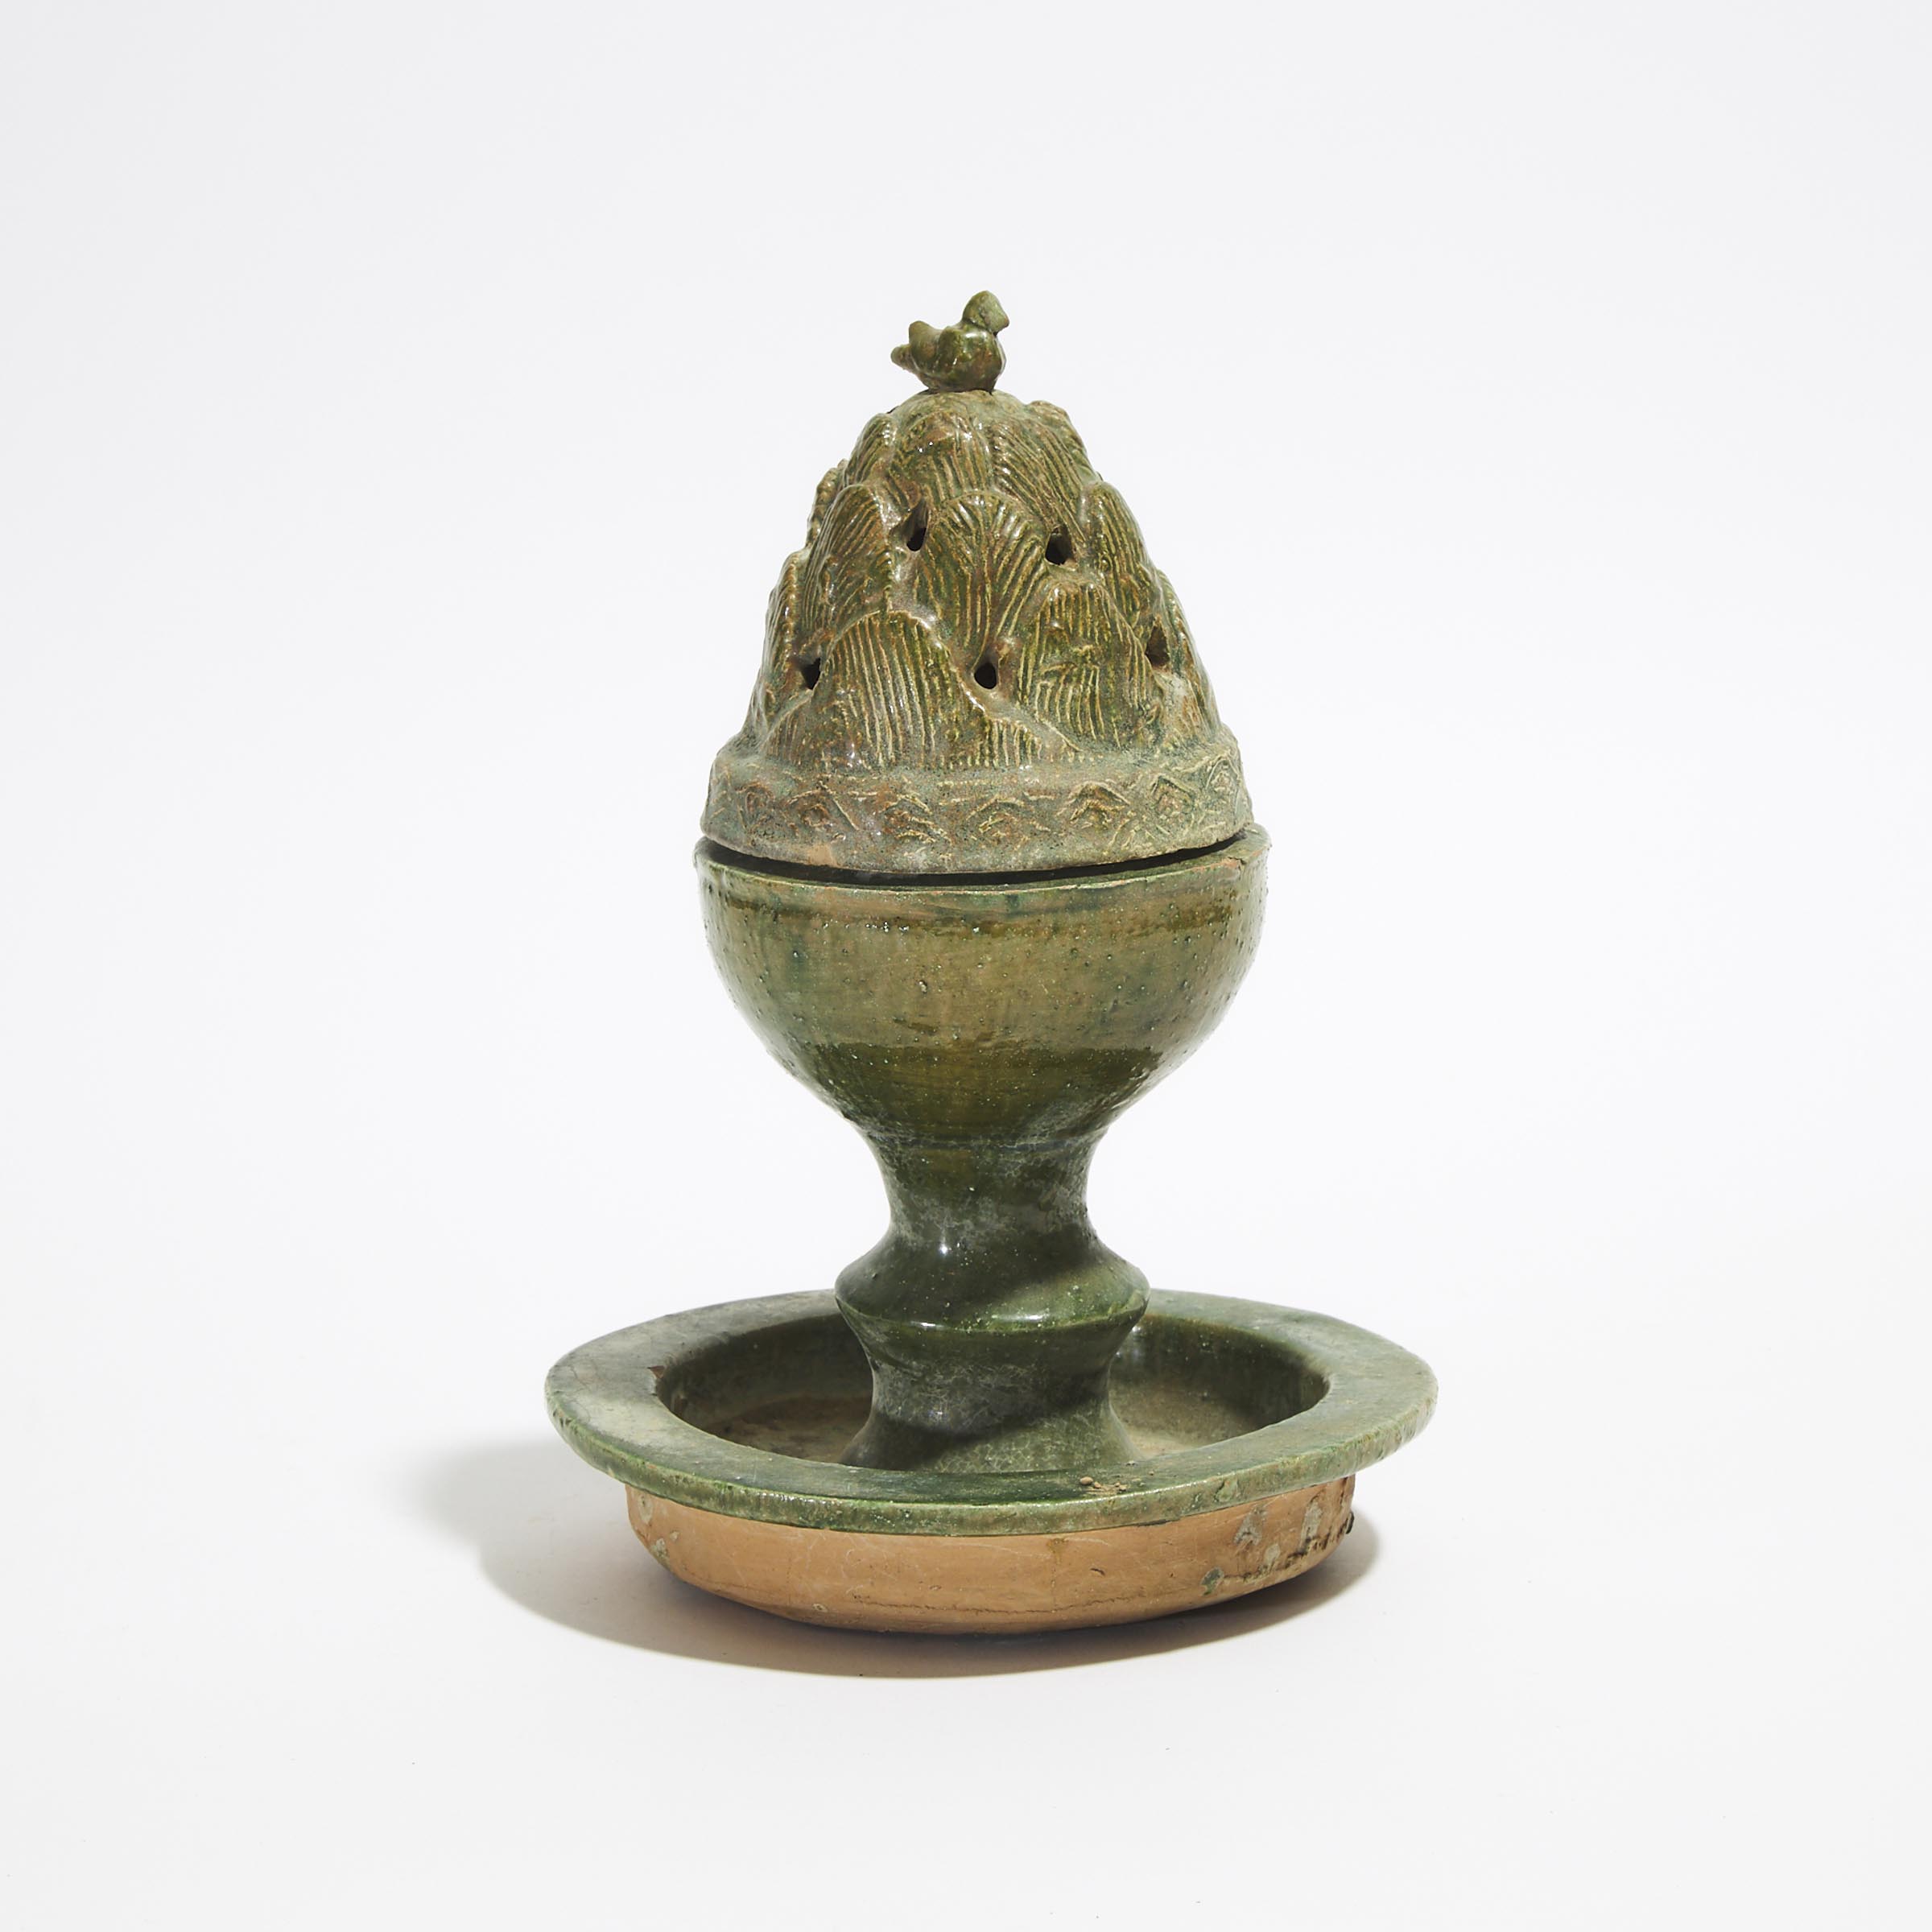 A Green-Glazed Pottery 'Hill' Censer and Cover, Boshanlu, Han Dynasty (206 BC - AD 220)